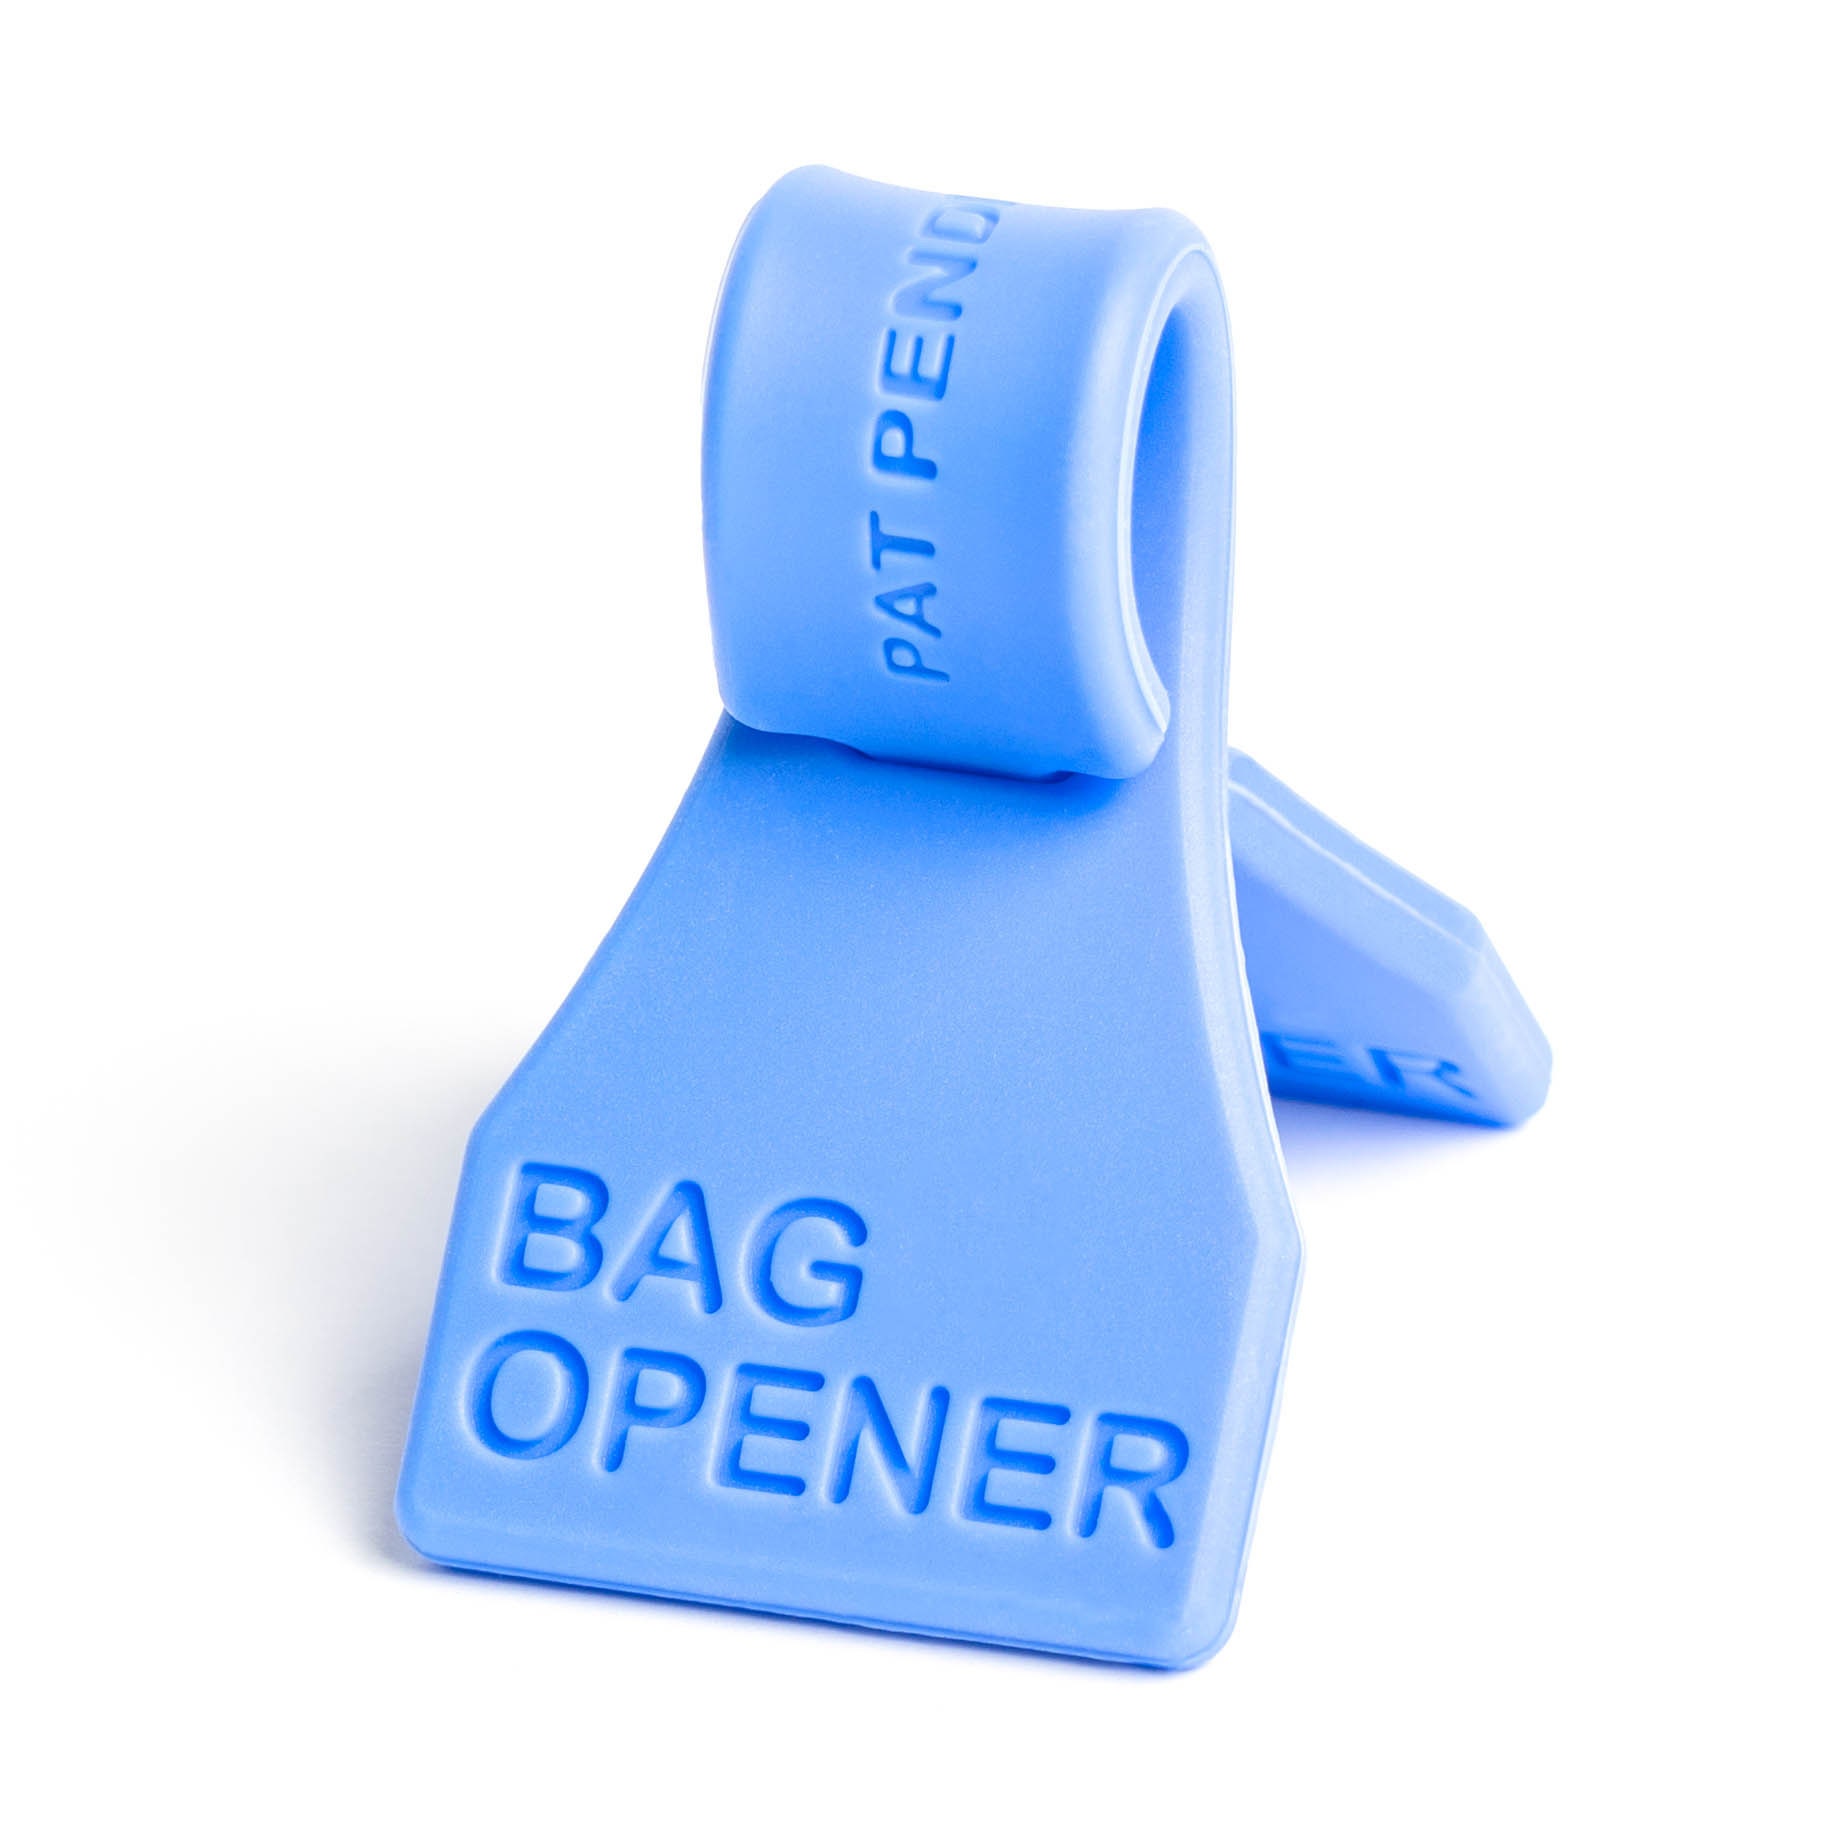 Make Your Own Poop Bag Holder Blue, Crafting Kits for Adults